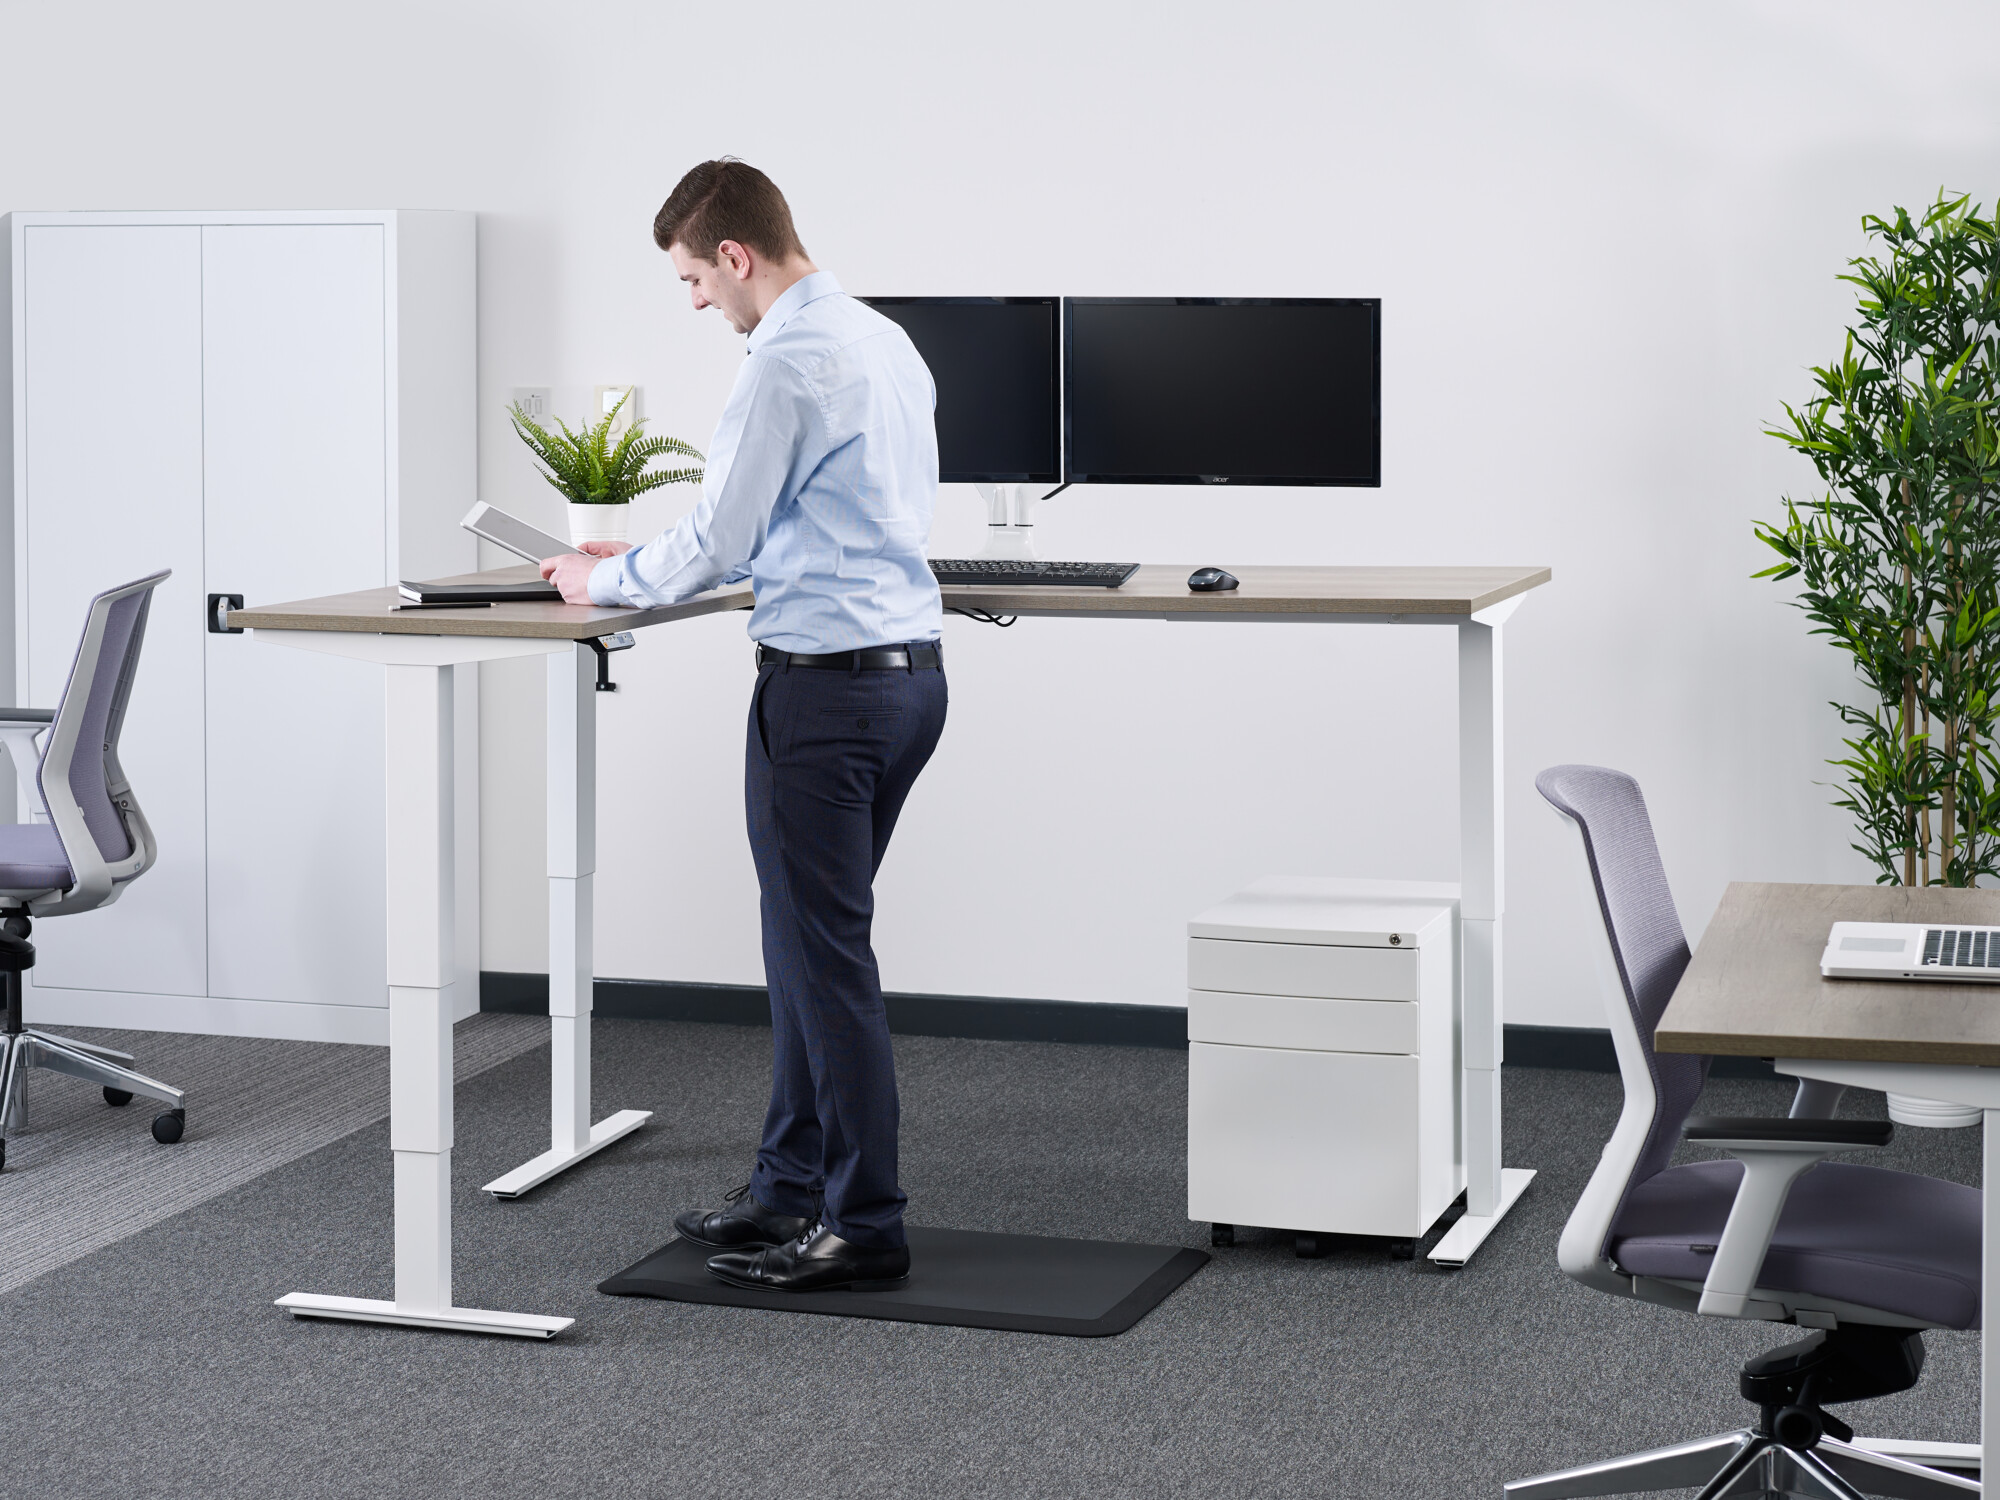 The premium Buro Ultimate Corner White Frame Height Adjustable Desk is available in 6 top finishes, so you can build your dream desk that matches your style.